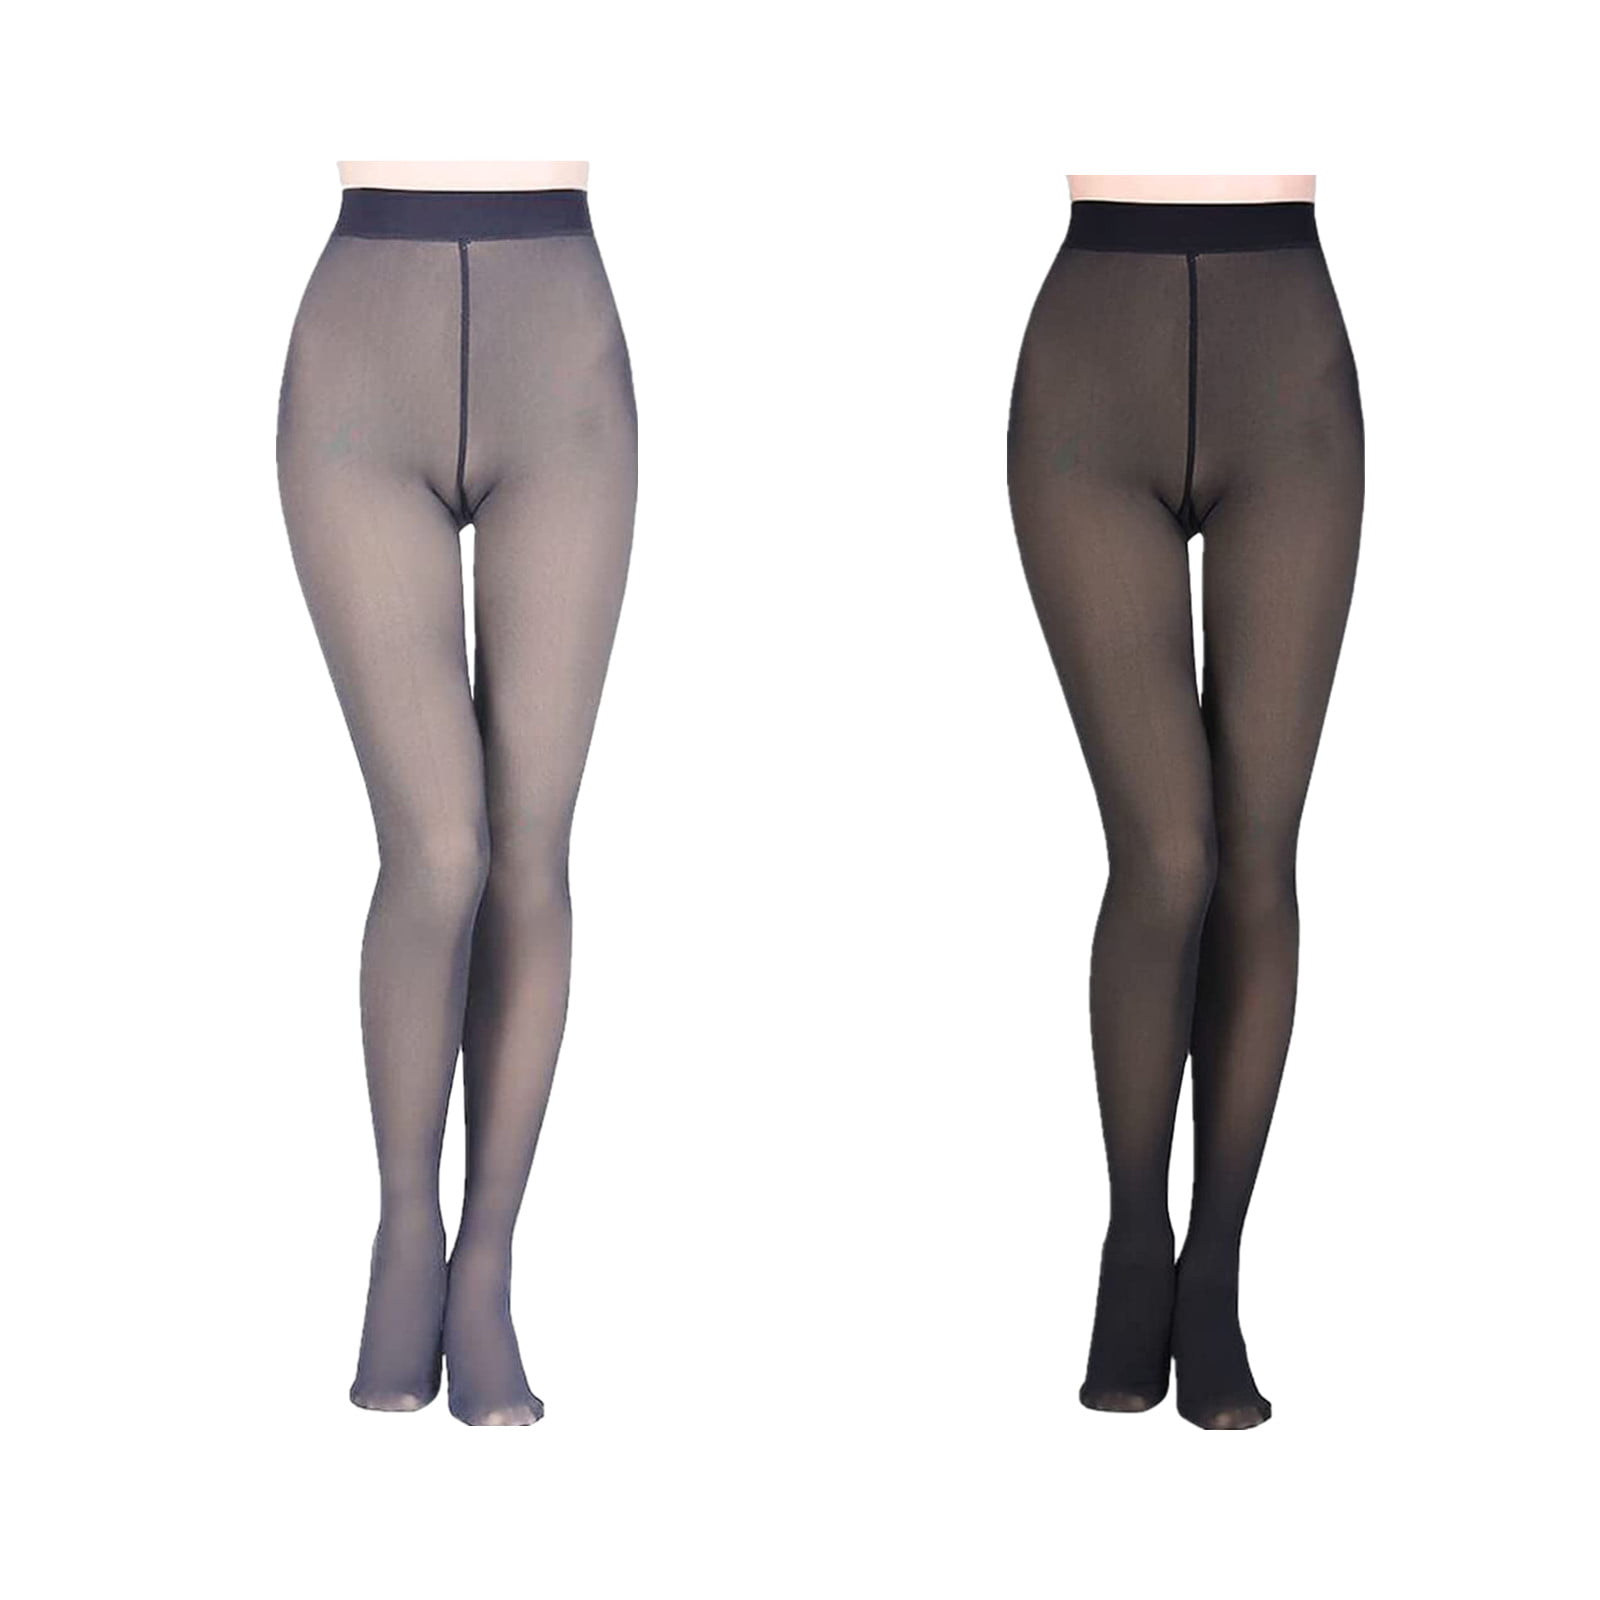 AMITOFO Fleece Lined Tights for Women Plus Size Sheer Pantyhose